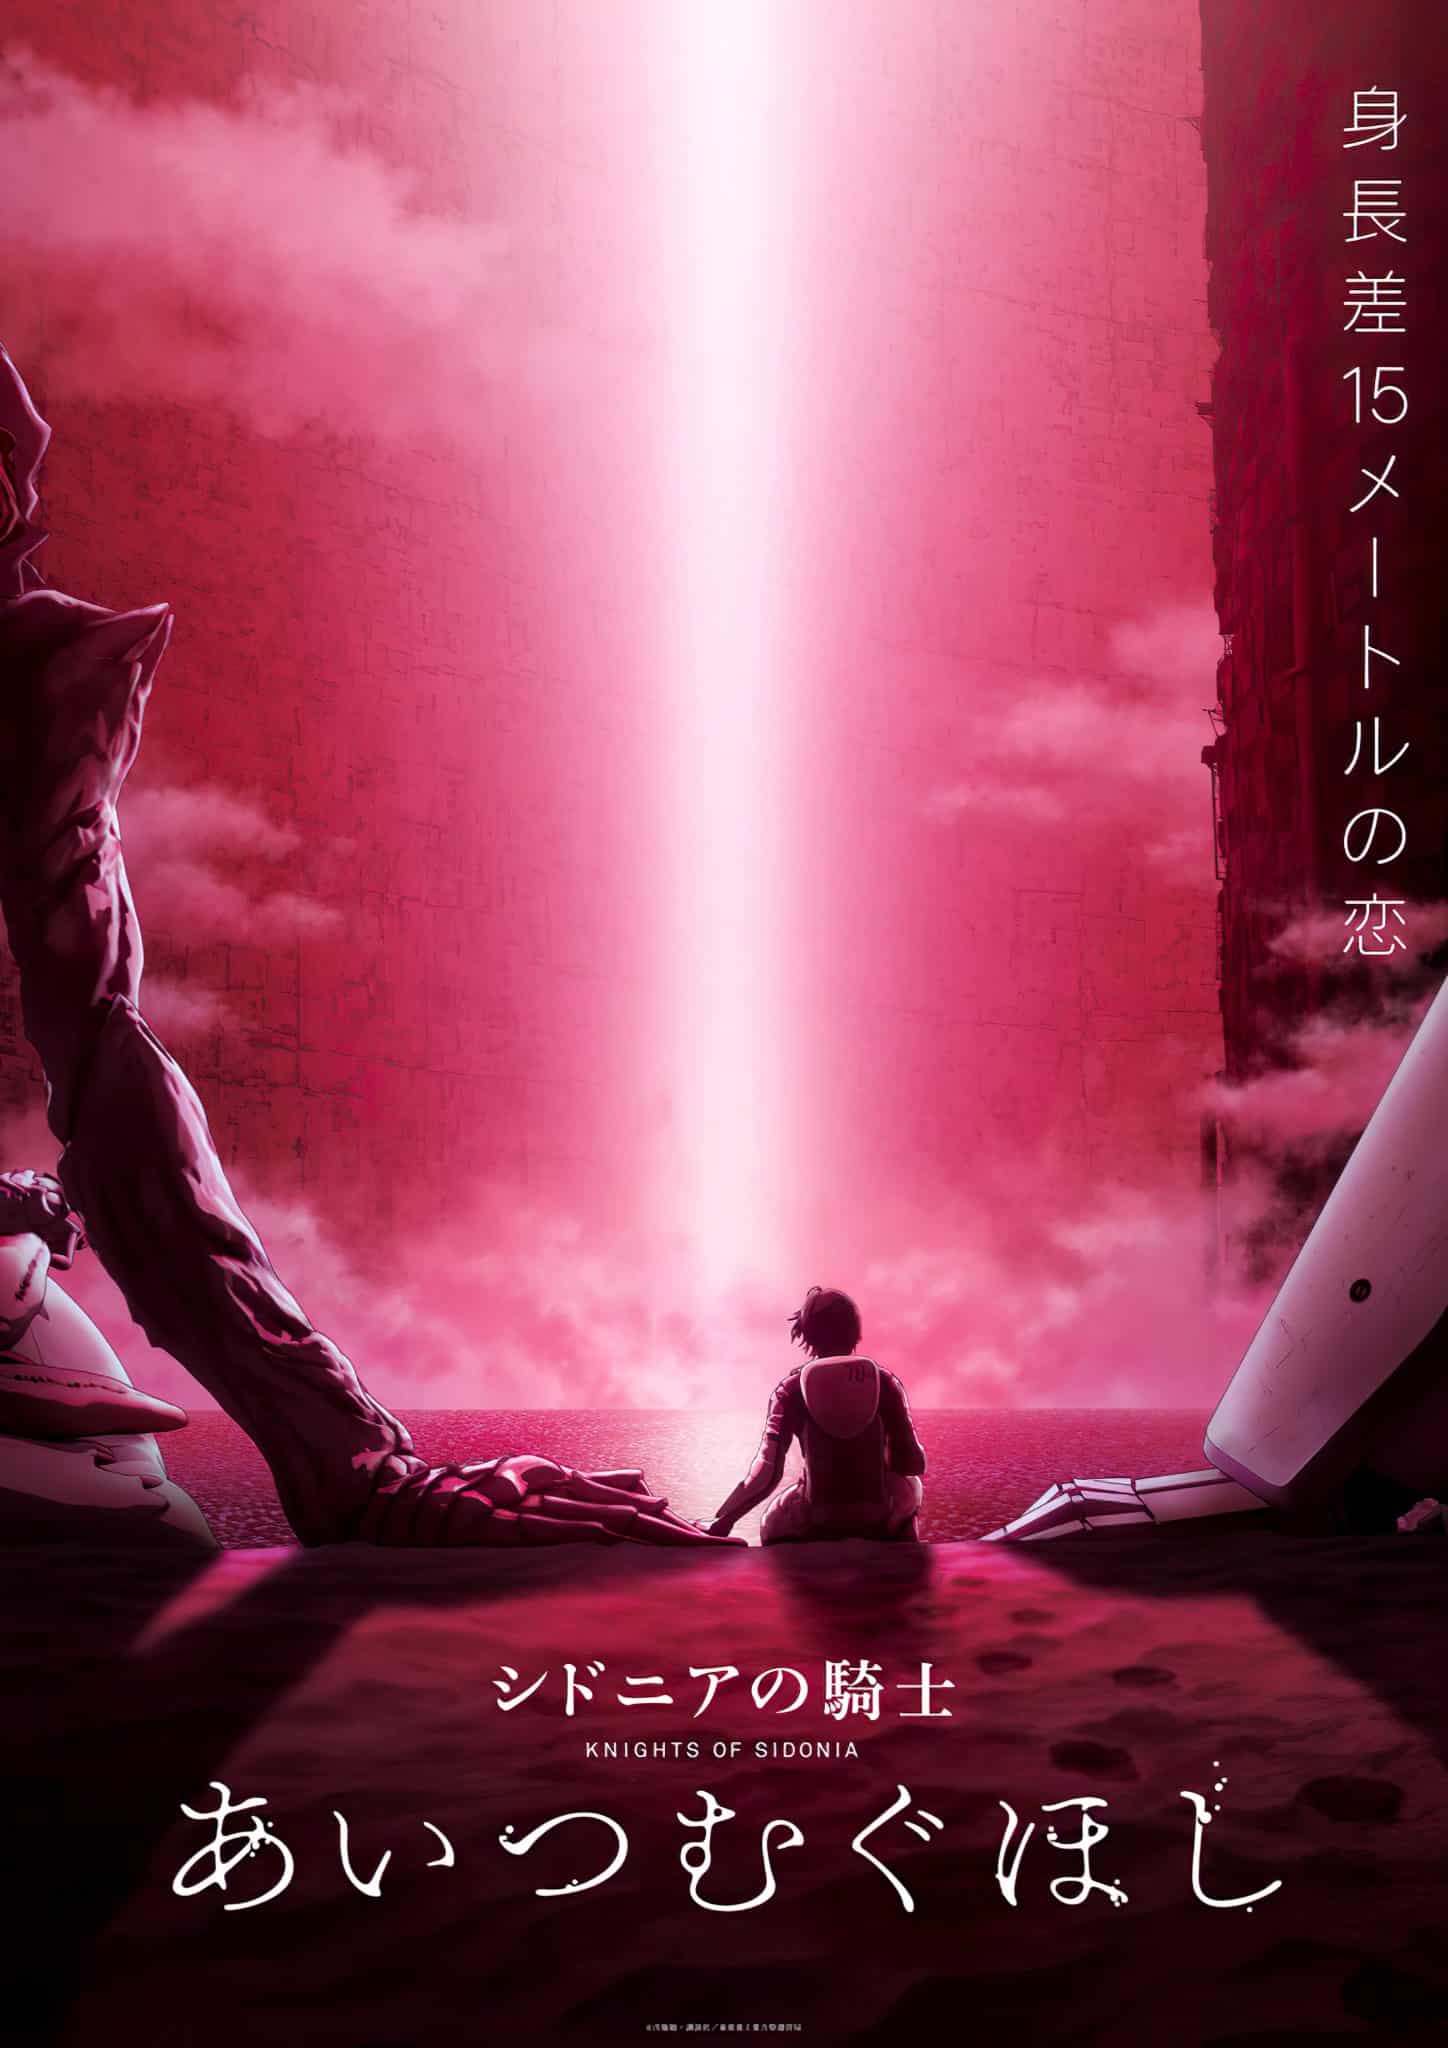 Annonce d'un film d'animation Knights of Sidonia pour 2021